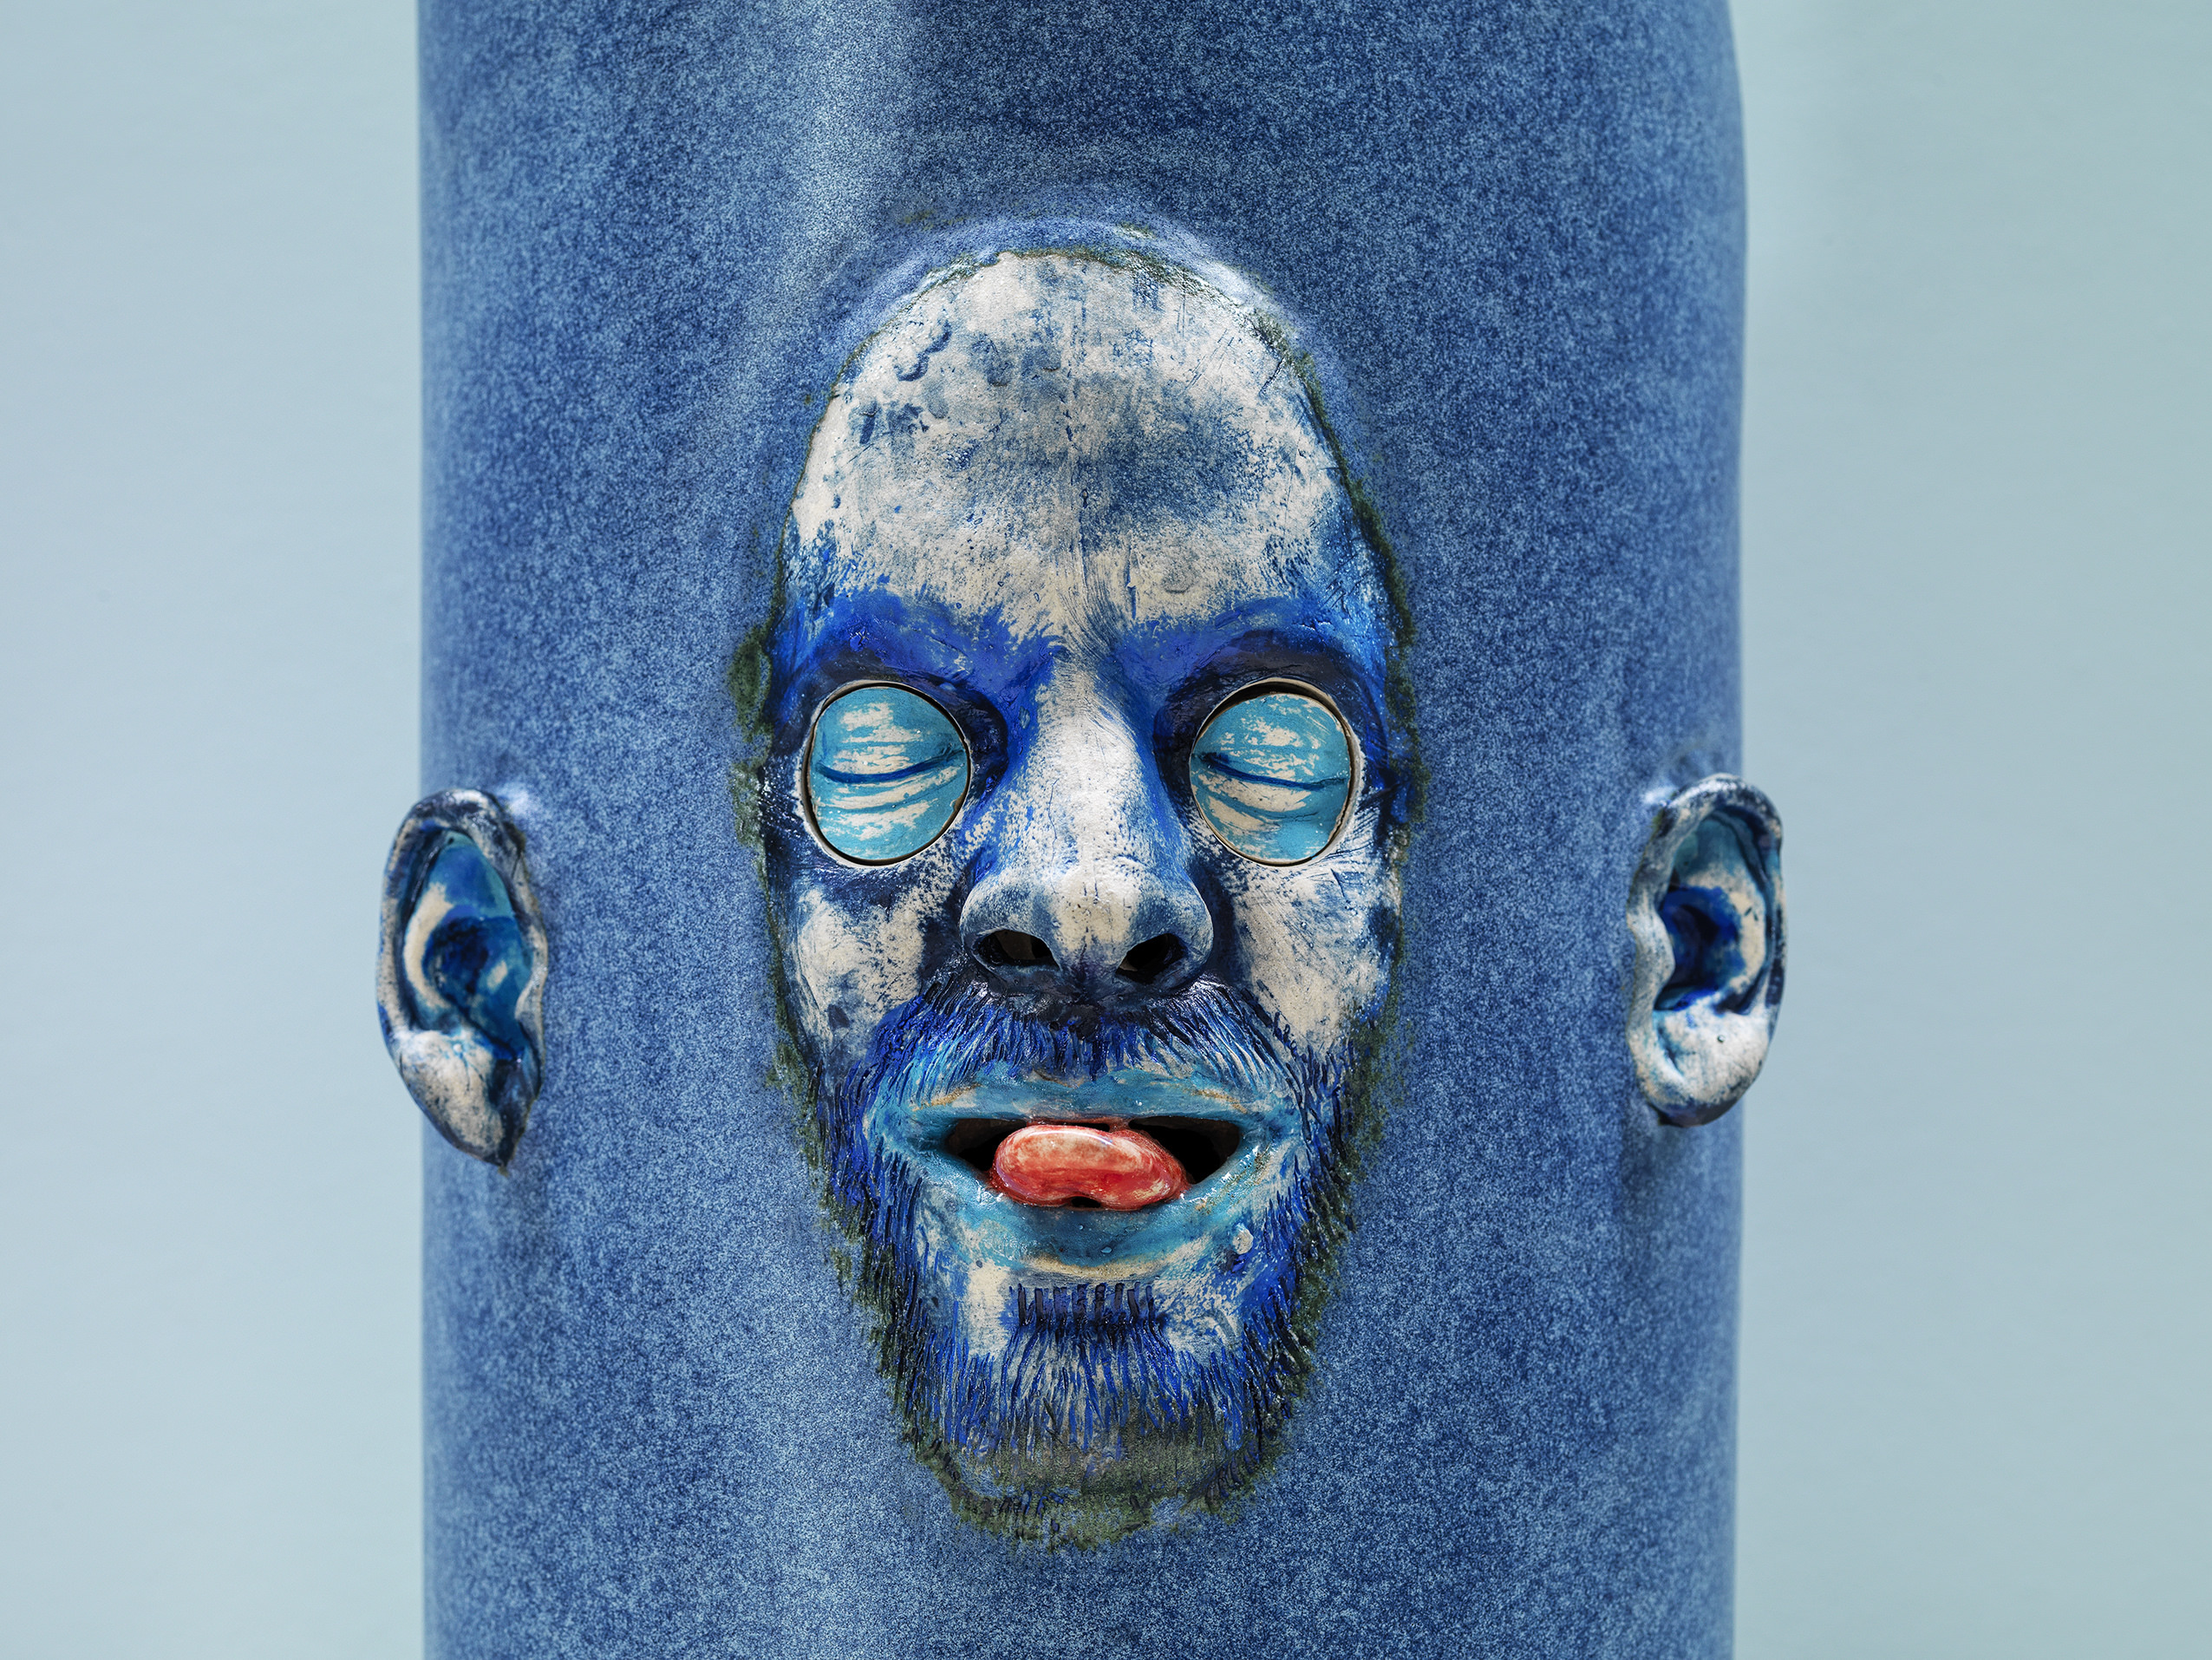 A close up of a blue ceramic cylinder with a face emerging from it.